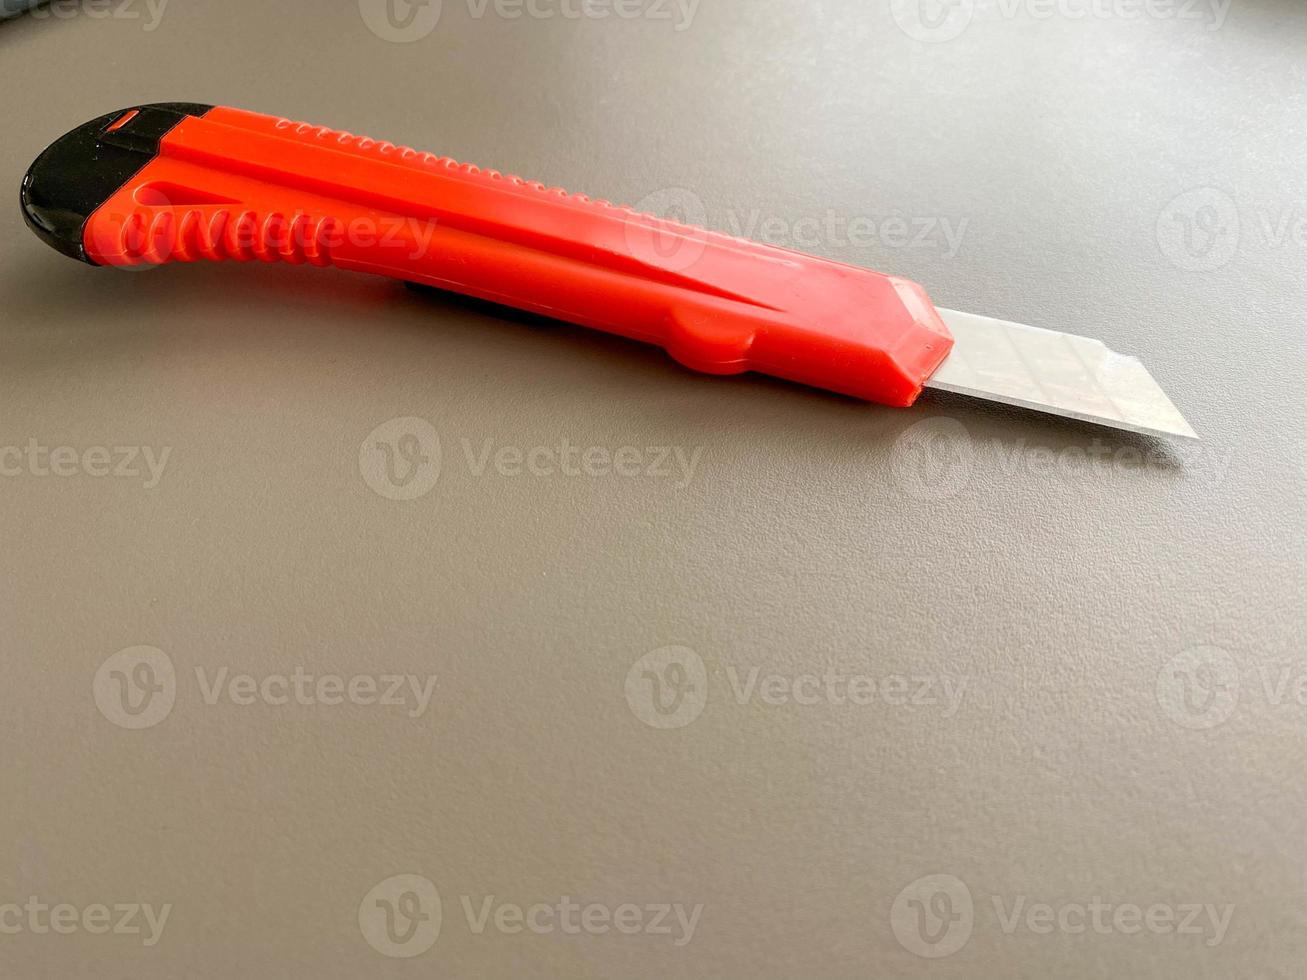 Red sharp office stationery knife with a paper cutting blade on a desktop office desk. Business work photo